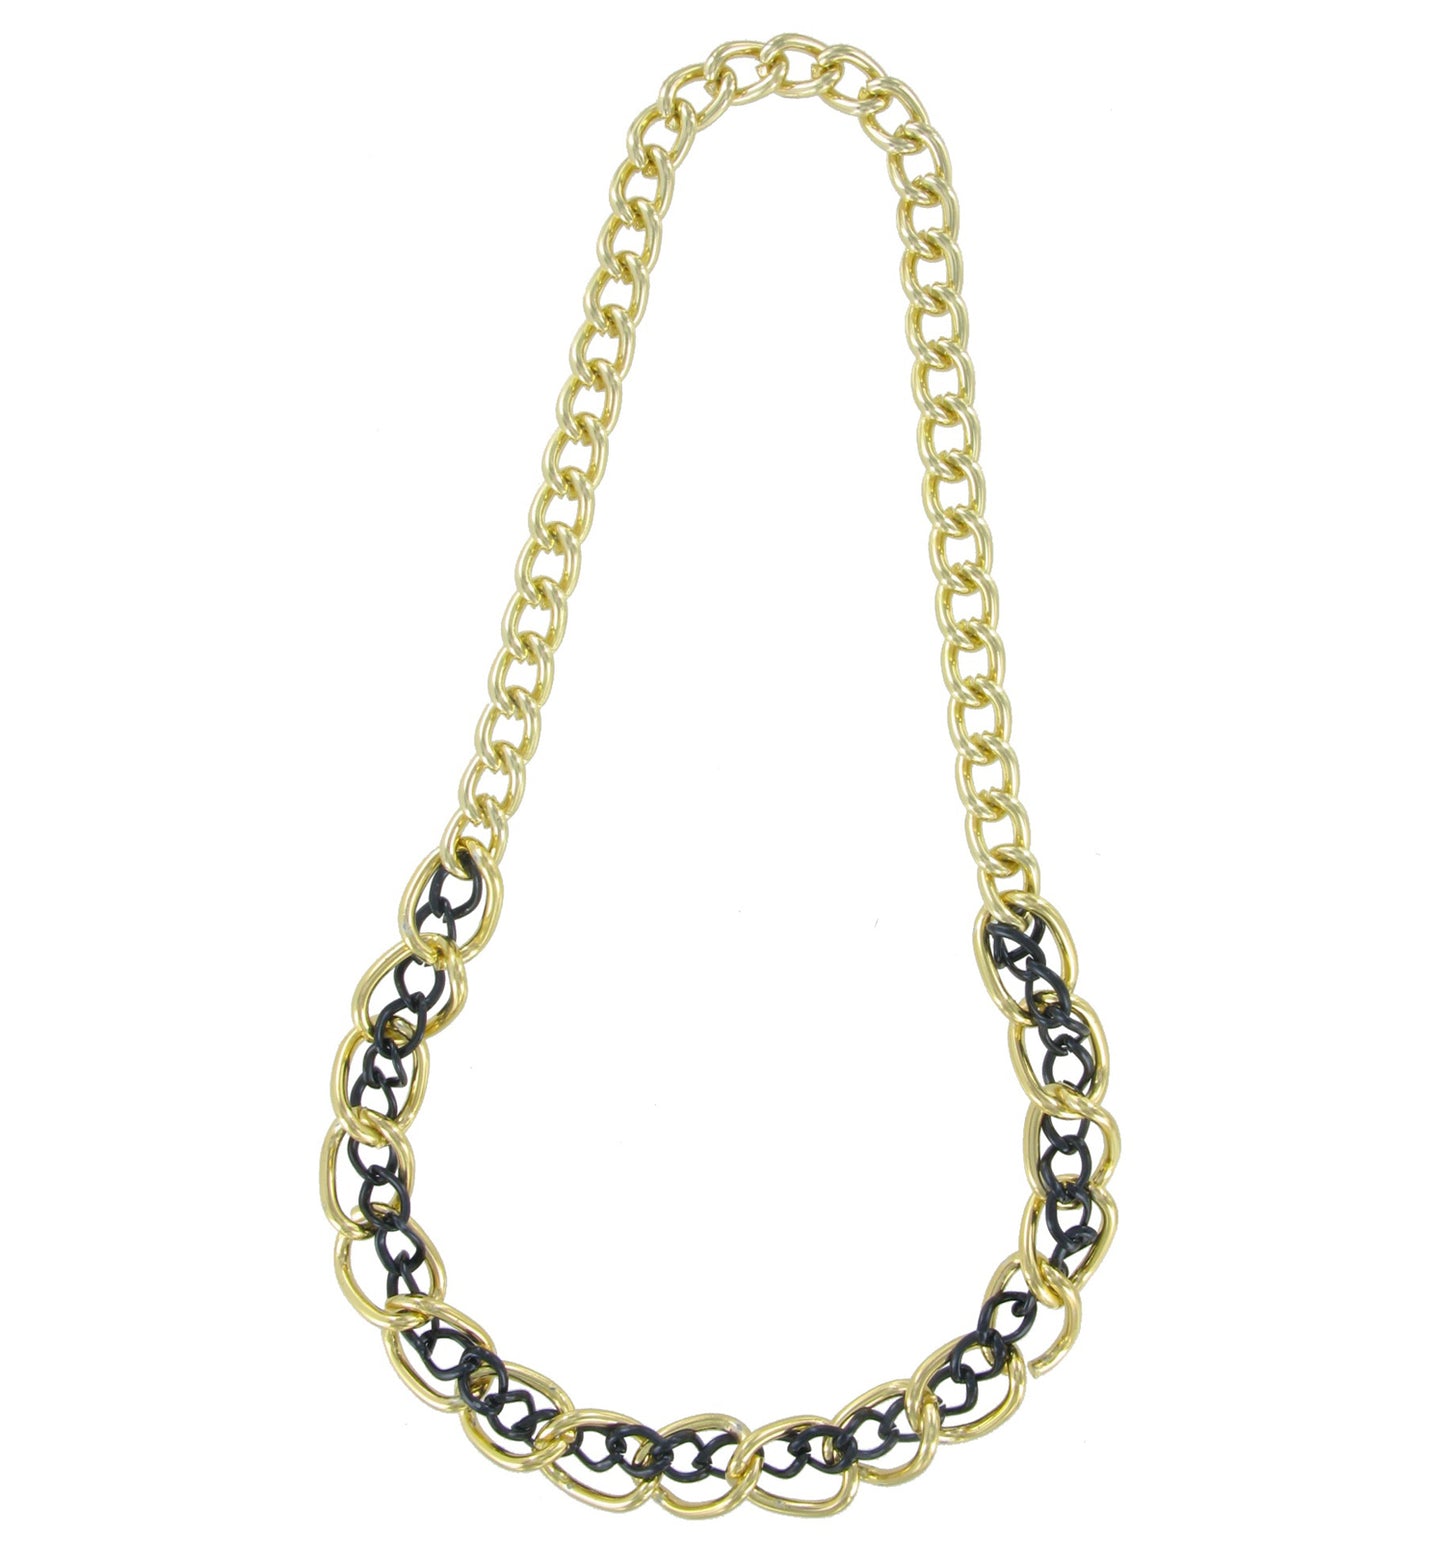 Necklace Chain Black Big Chunky Gold Tone Link 23"